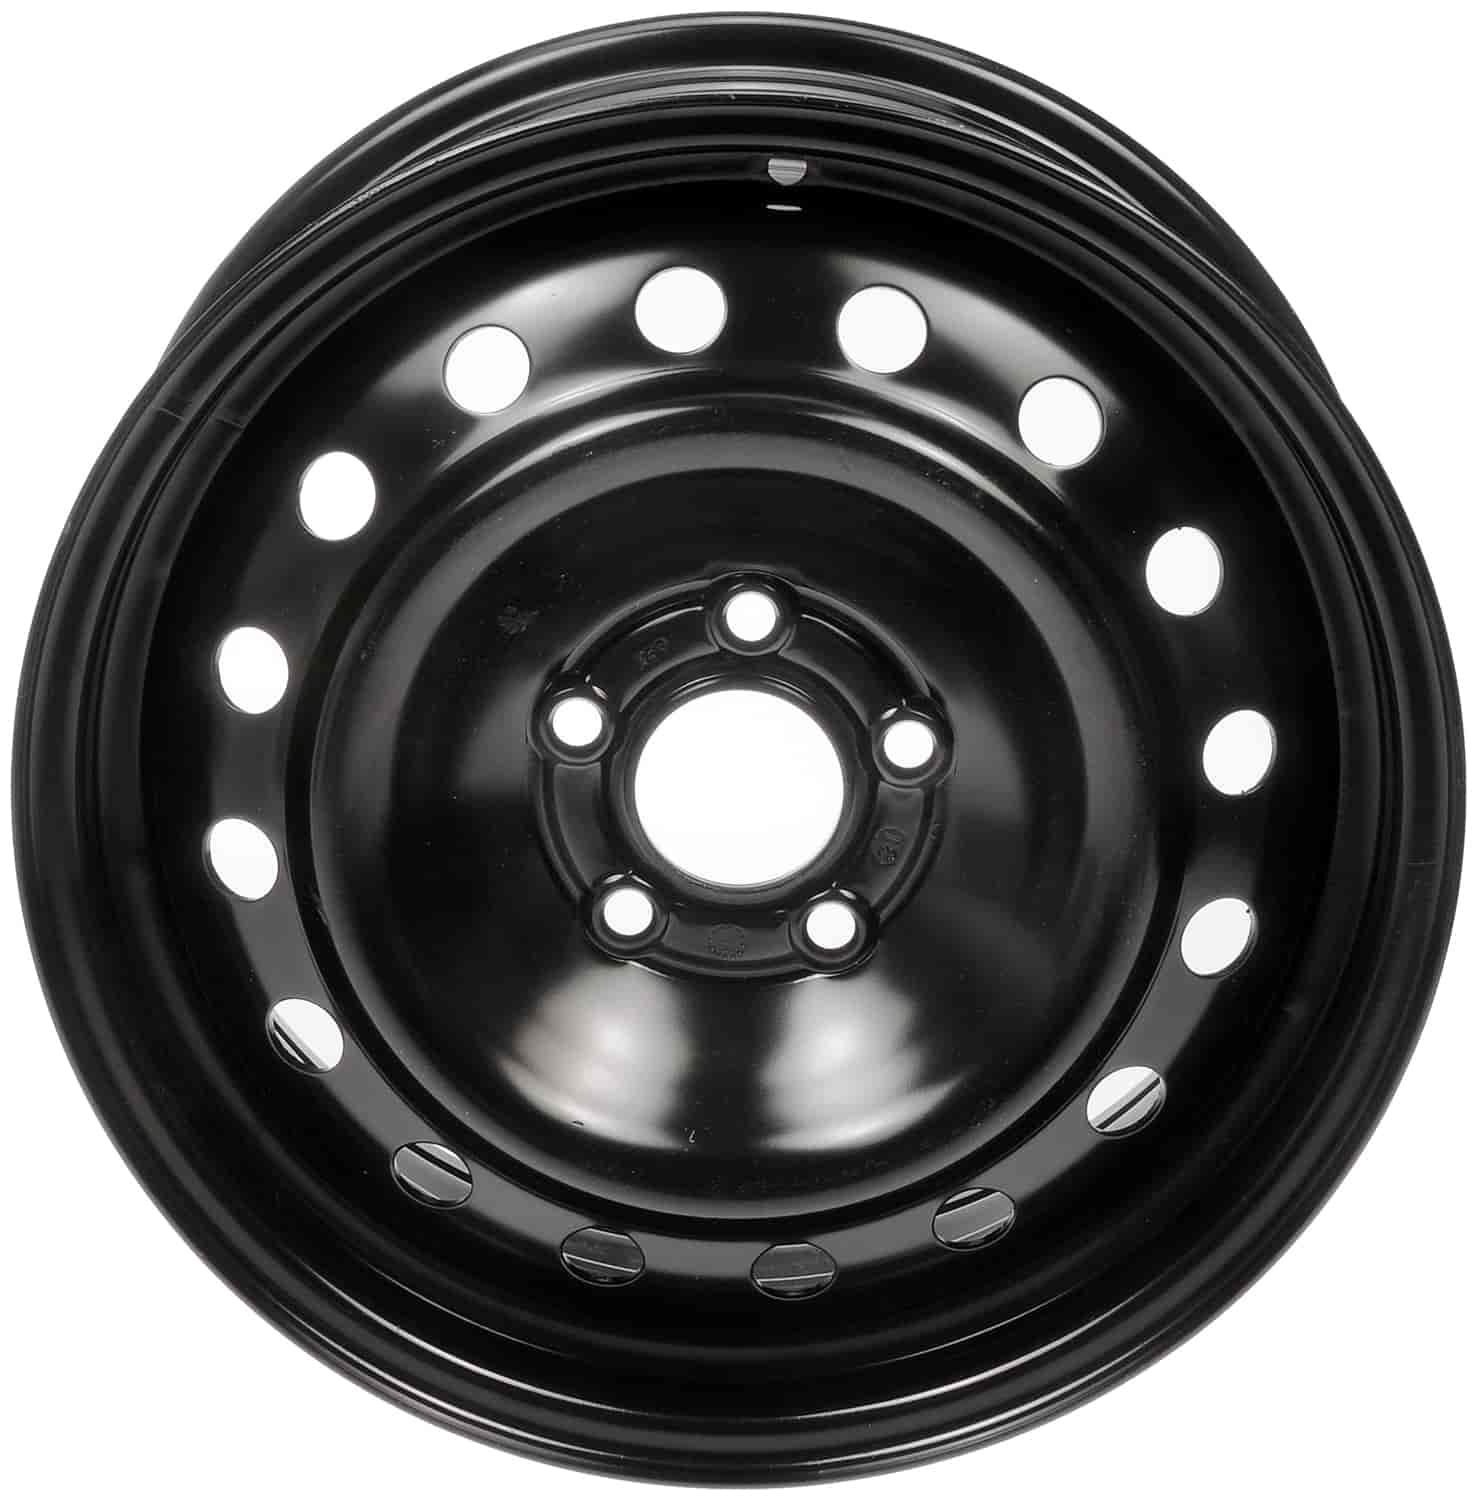 16 x 6.5" Steel Wheel for 2012-2018 Ford Focus, 2013-2019 Ford Fusion